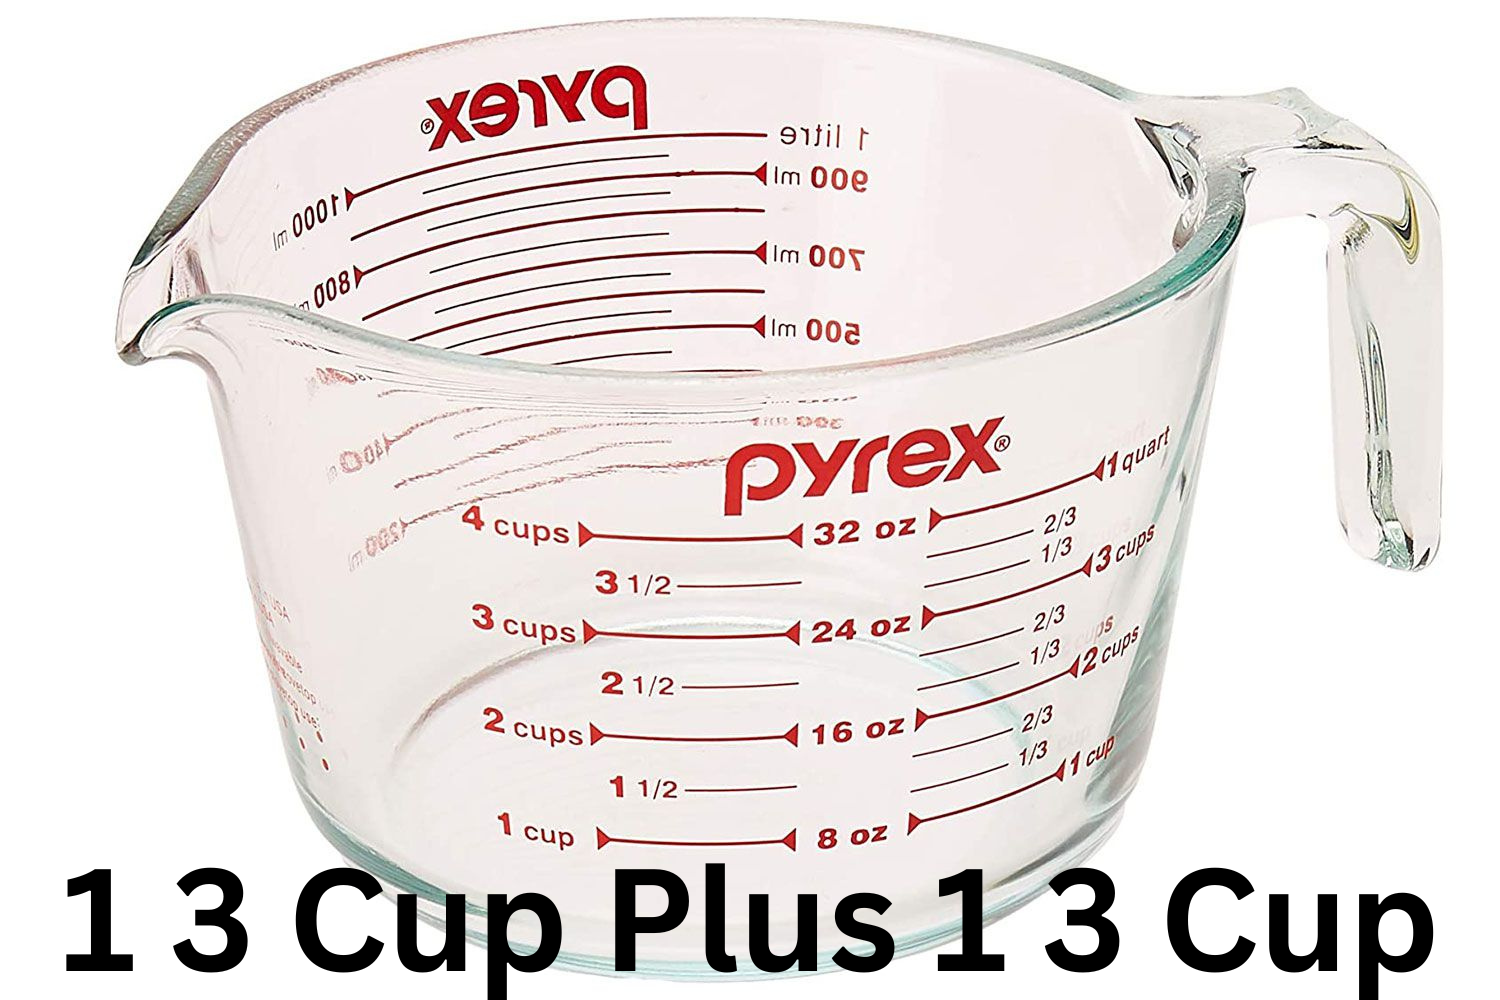 1 3 Cup Plus 1 3 Cup